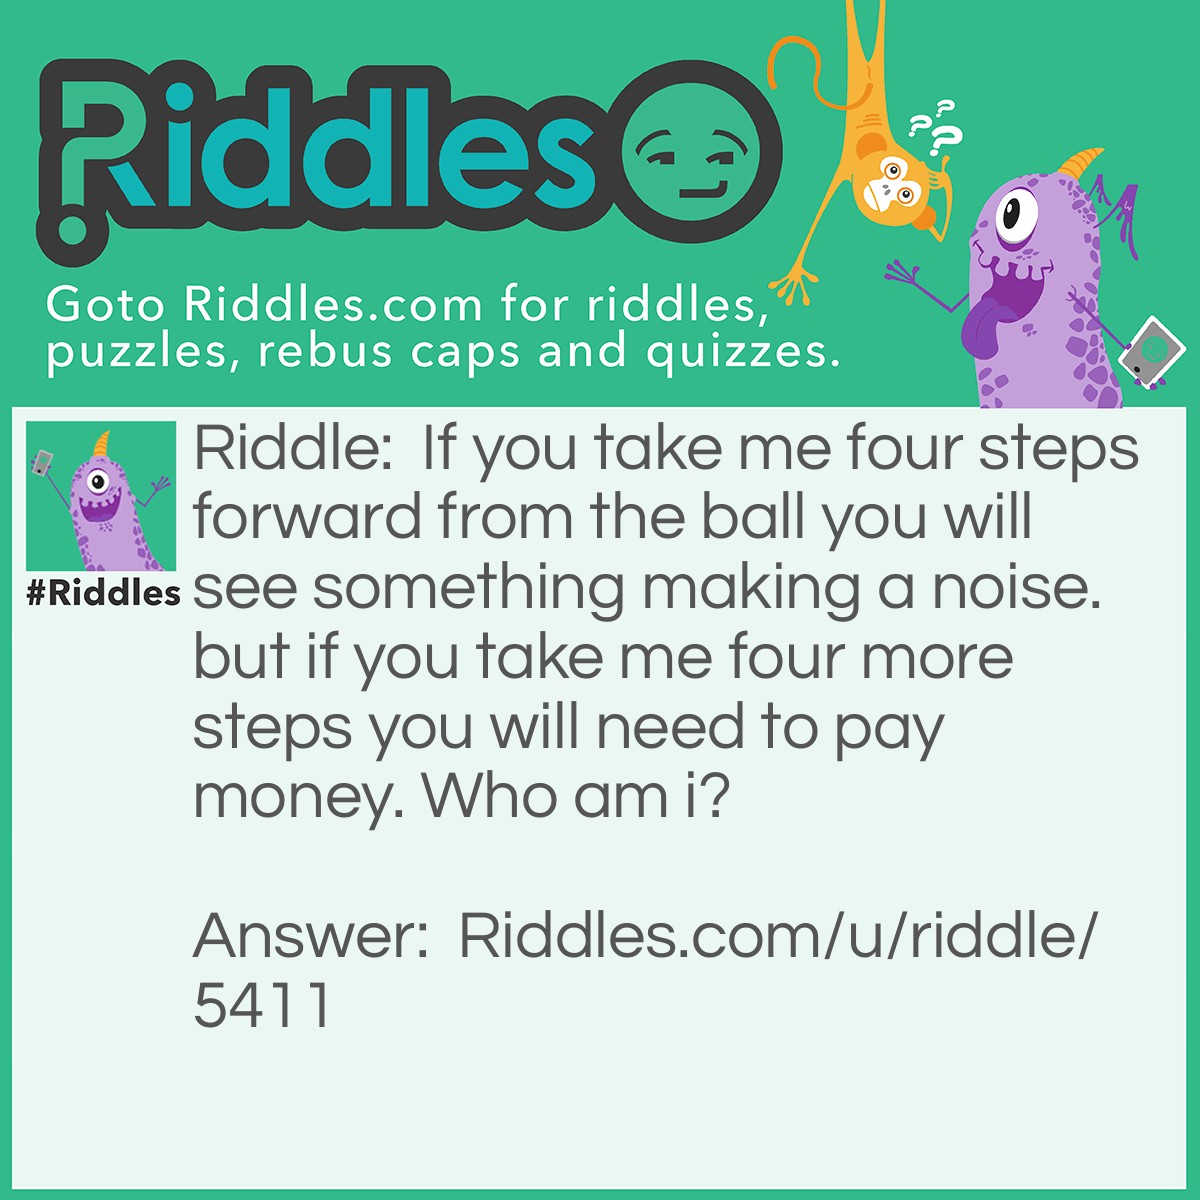 Riddle: If you take me four steps forward from the ball you will see something making a noise. but if you take me four more steps you will need to pay money. Who am i? Answer: The letter A. If you take the letter 'a' from the word 'ball' and you move it four steps it becomes 'e' and the word is 'bell' and it makes noise and then you move it four more it becomes 'i' and then the word is 'bill' and you need to pay money.